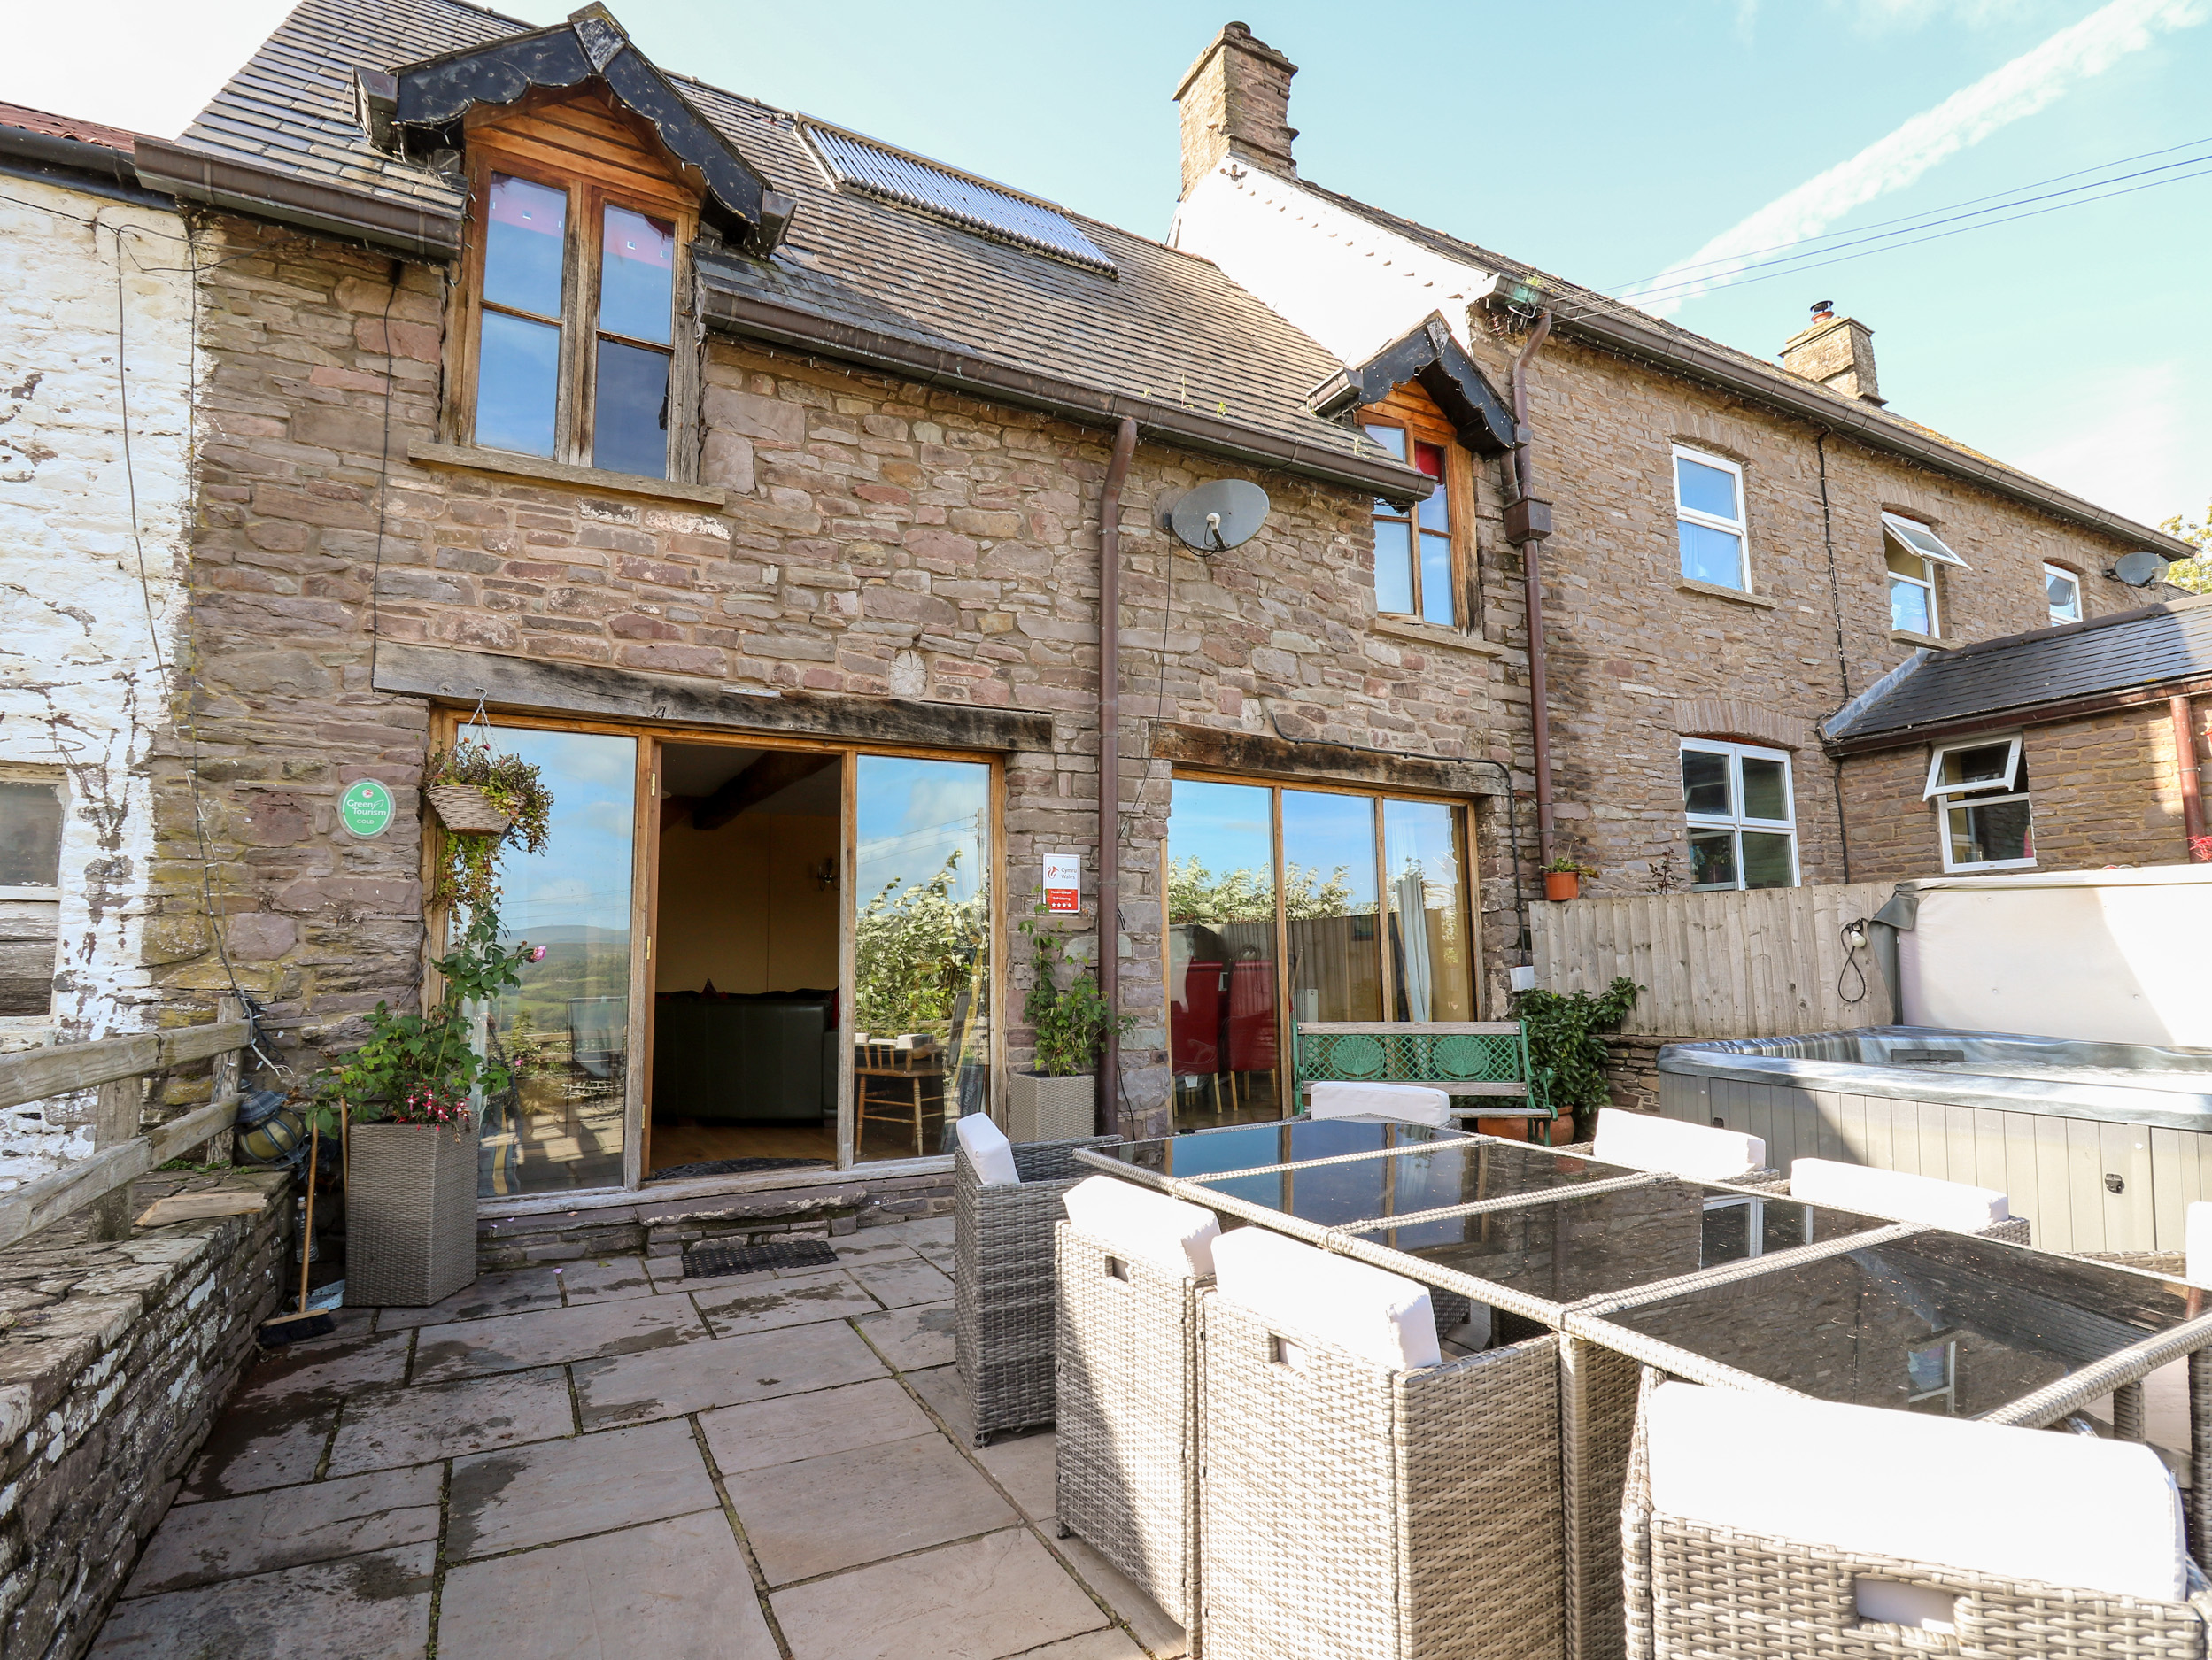 Peacock Cottage is in Talybont-on-Usk, Powys. Three-bedroom home with rural views and hot tub. Pets.